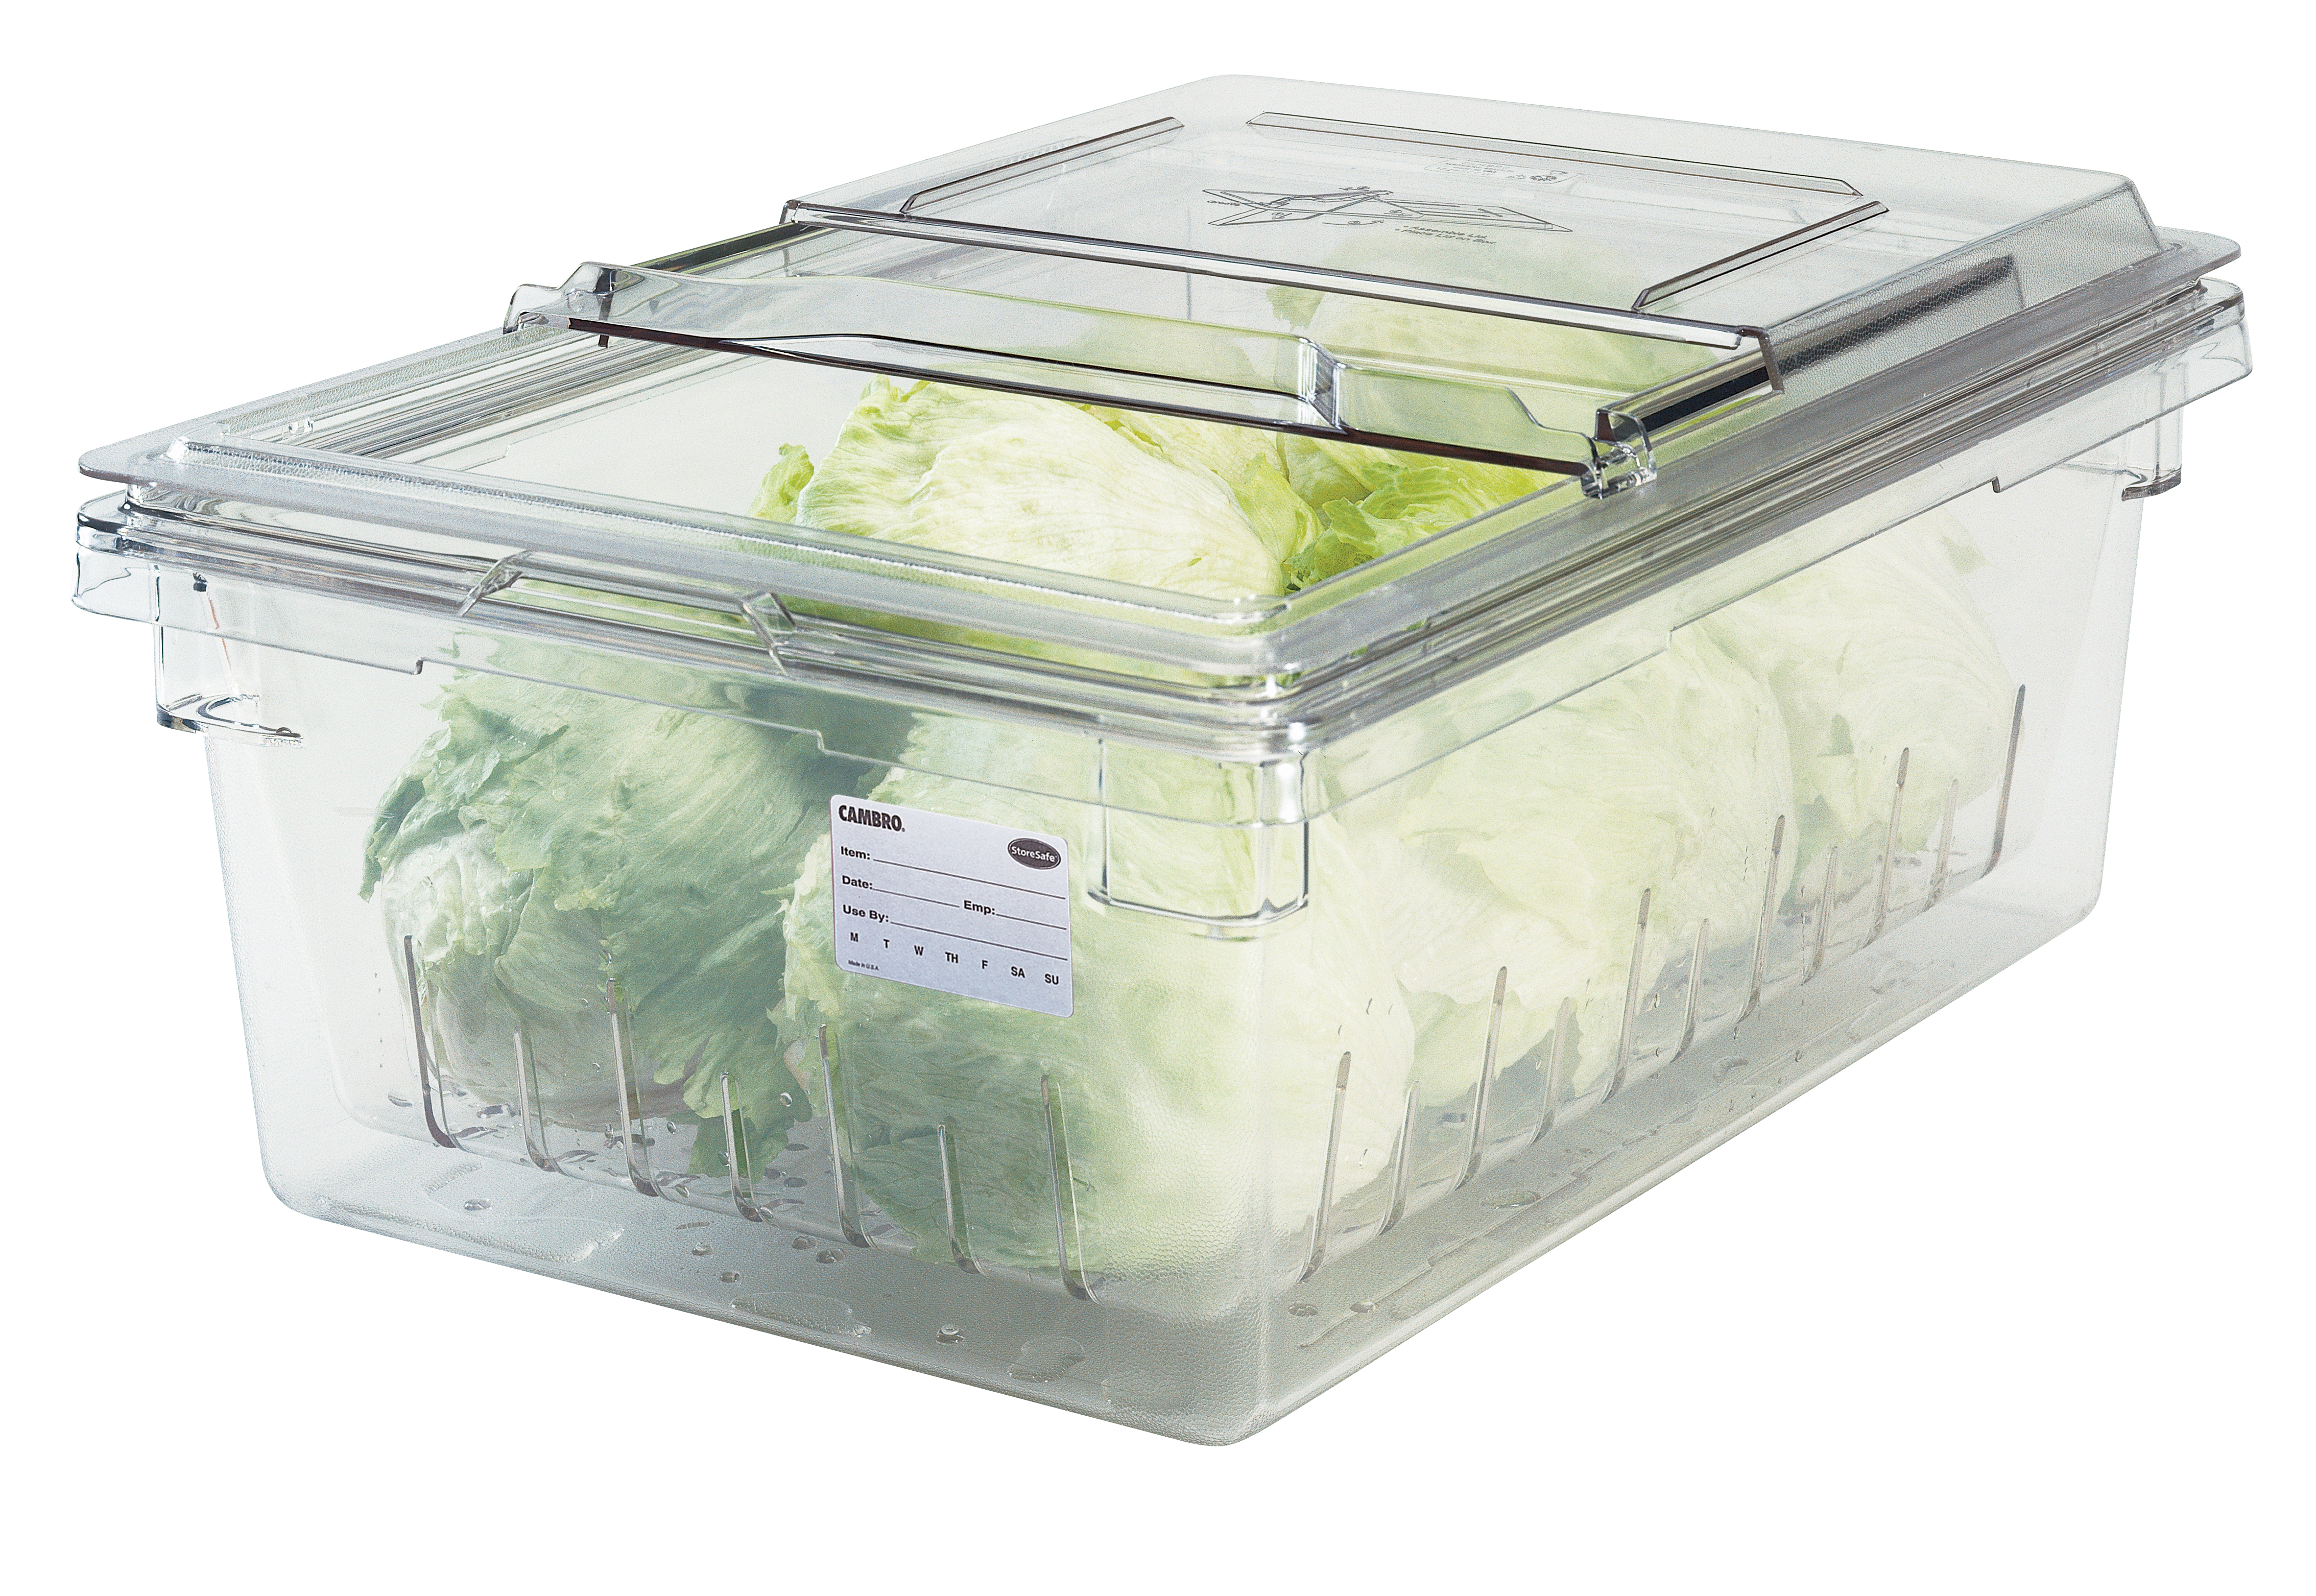 A colander kit food box with slidinglid, full of cabbages, with a StoreSafe label on the front